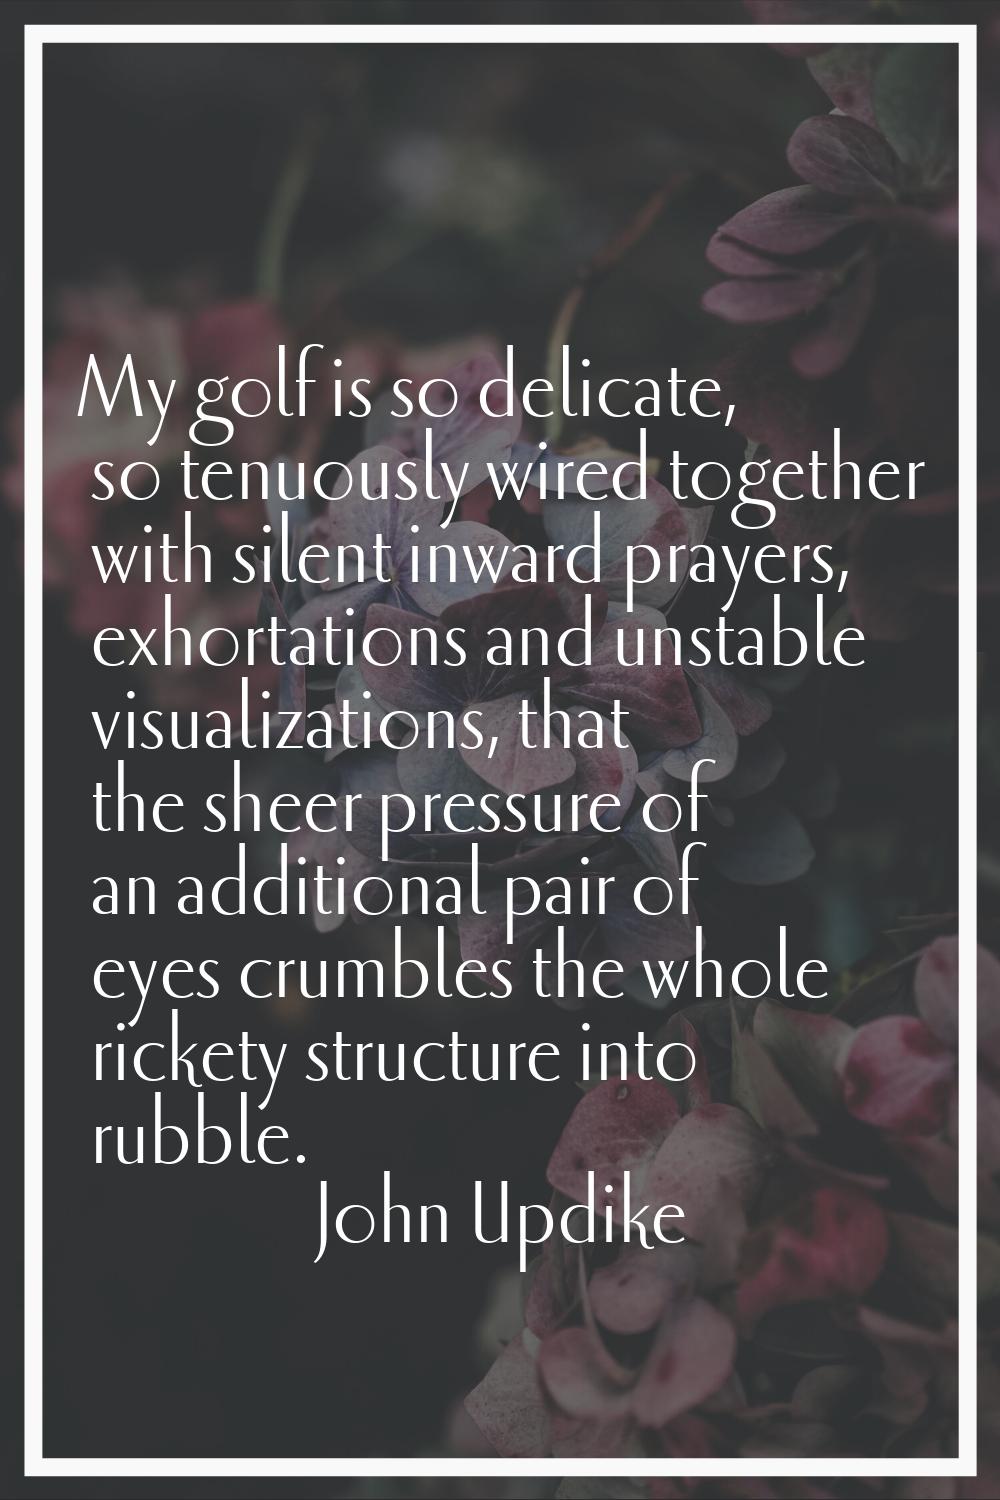 My golf is so delicate, so tenuously wired together with silent inward prayers, exhortations and un